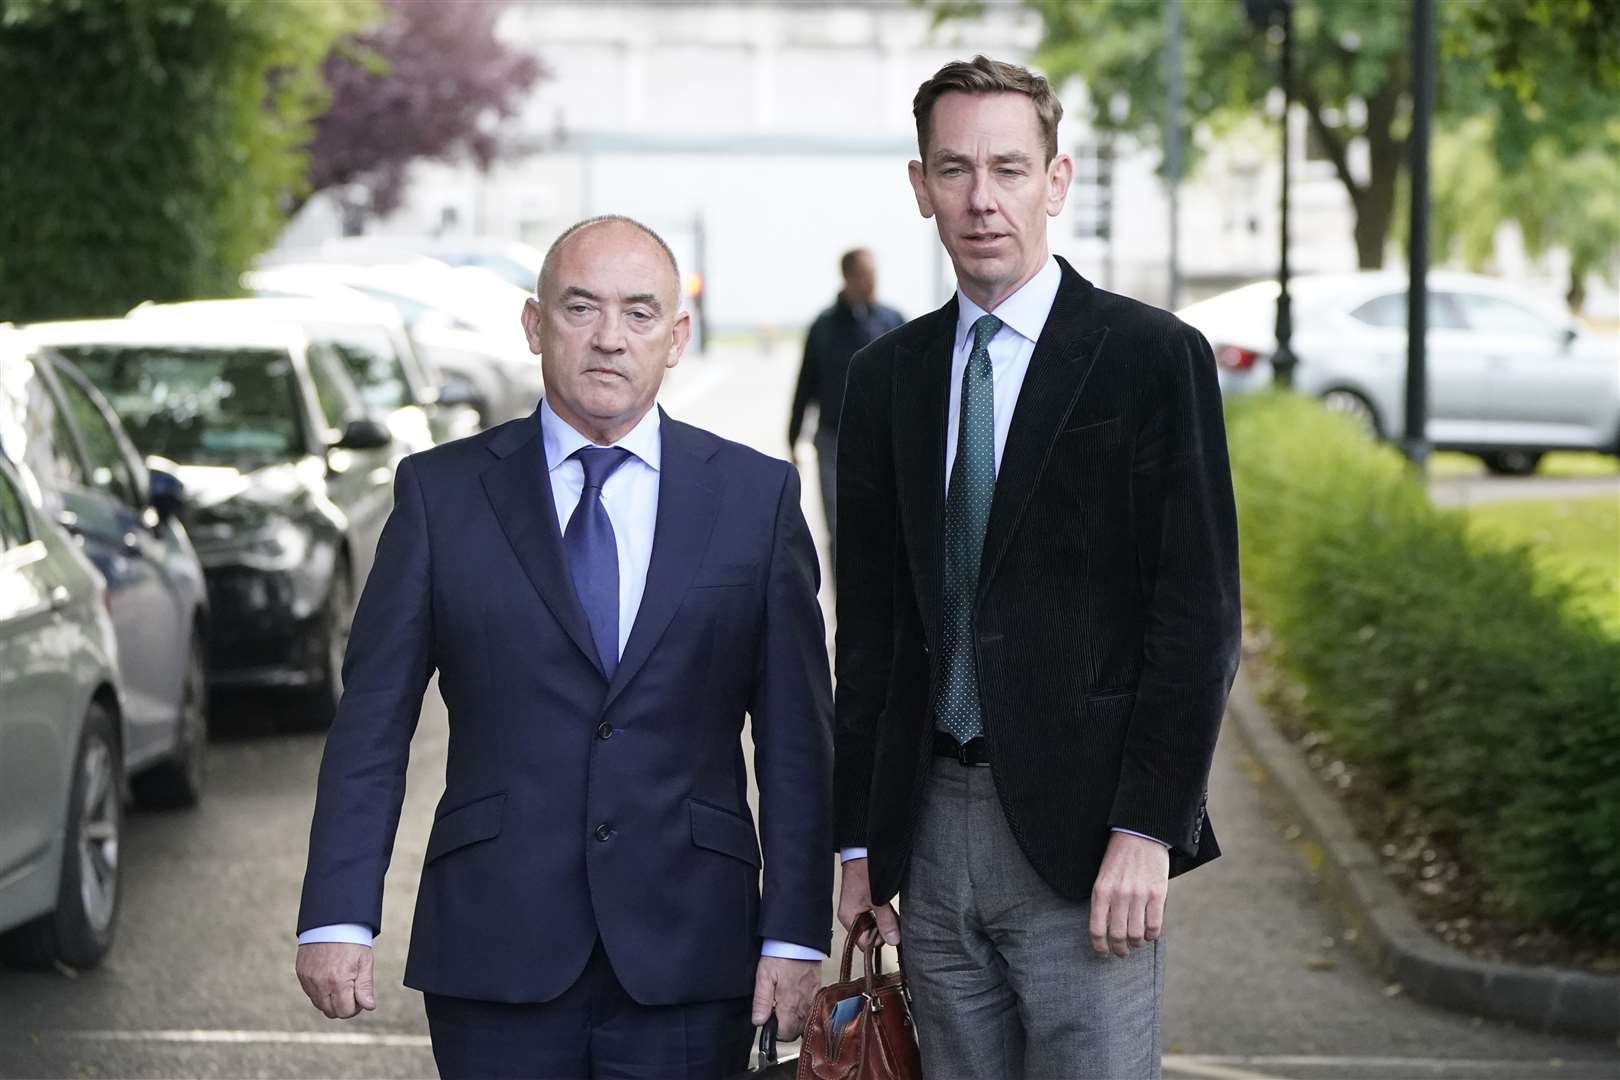 RTE presenter Ryan Tubridy (right) with his agent Noel Kelly leaving Leinster House on Tuesday (Niall Carson/PA)